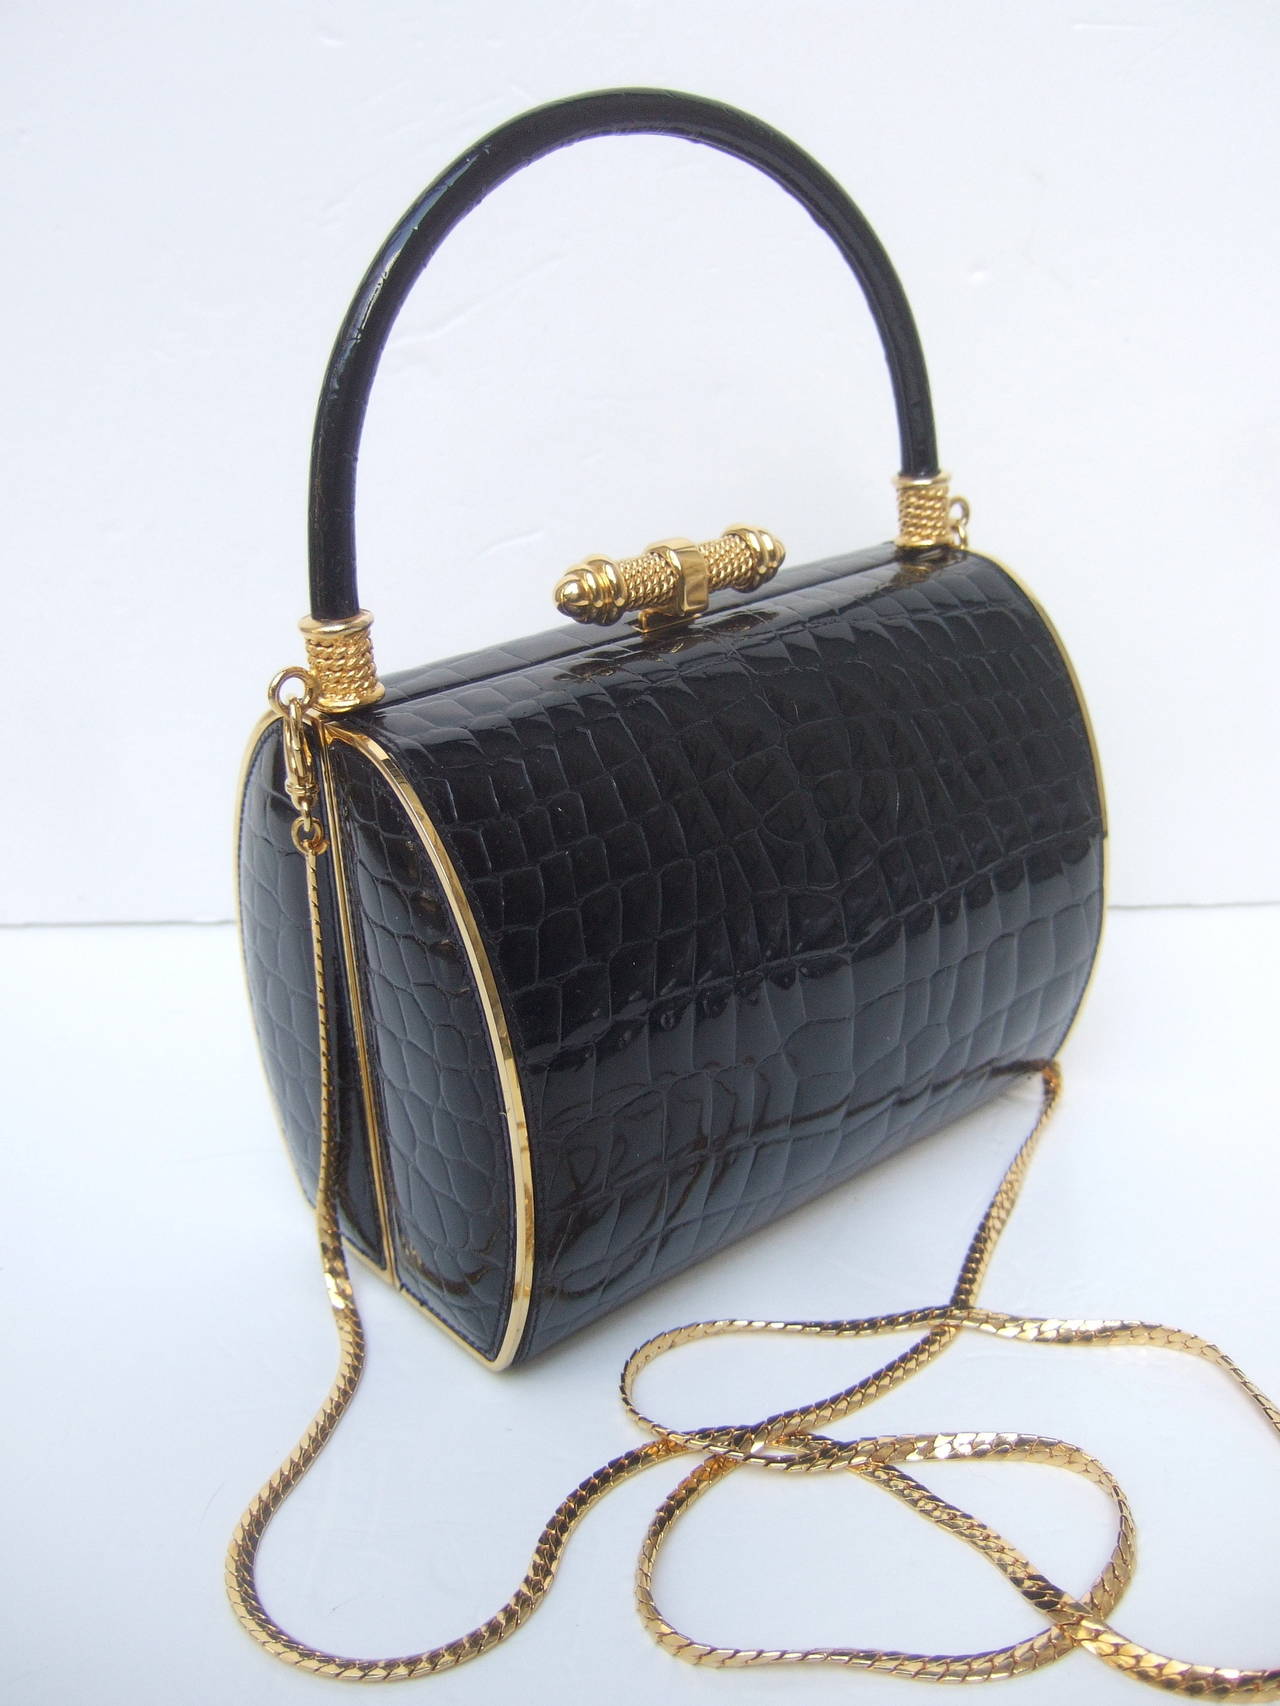 Elegant black embossed patent leather handbag designed by Finesse La Model 

The chic desiger handbag is covered with sleek black embossed leather that emulates reptile skin. The ornate clasp & hardware are shiny gilt metal accented with